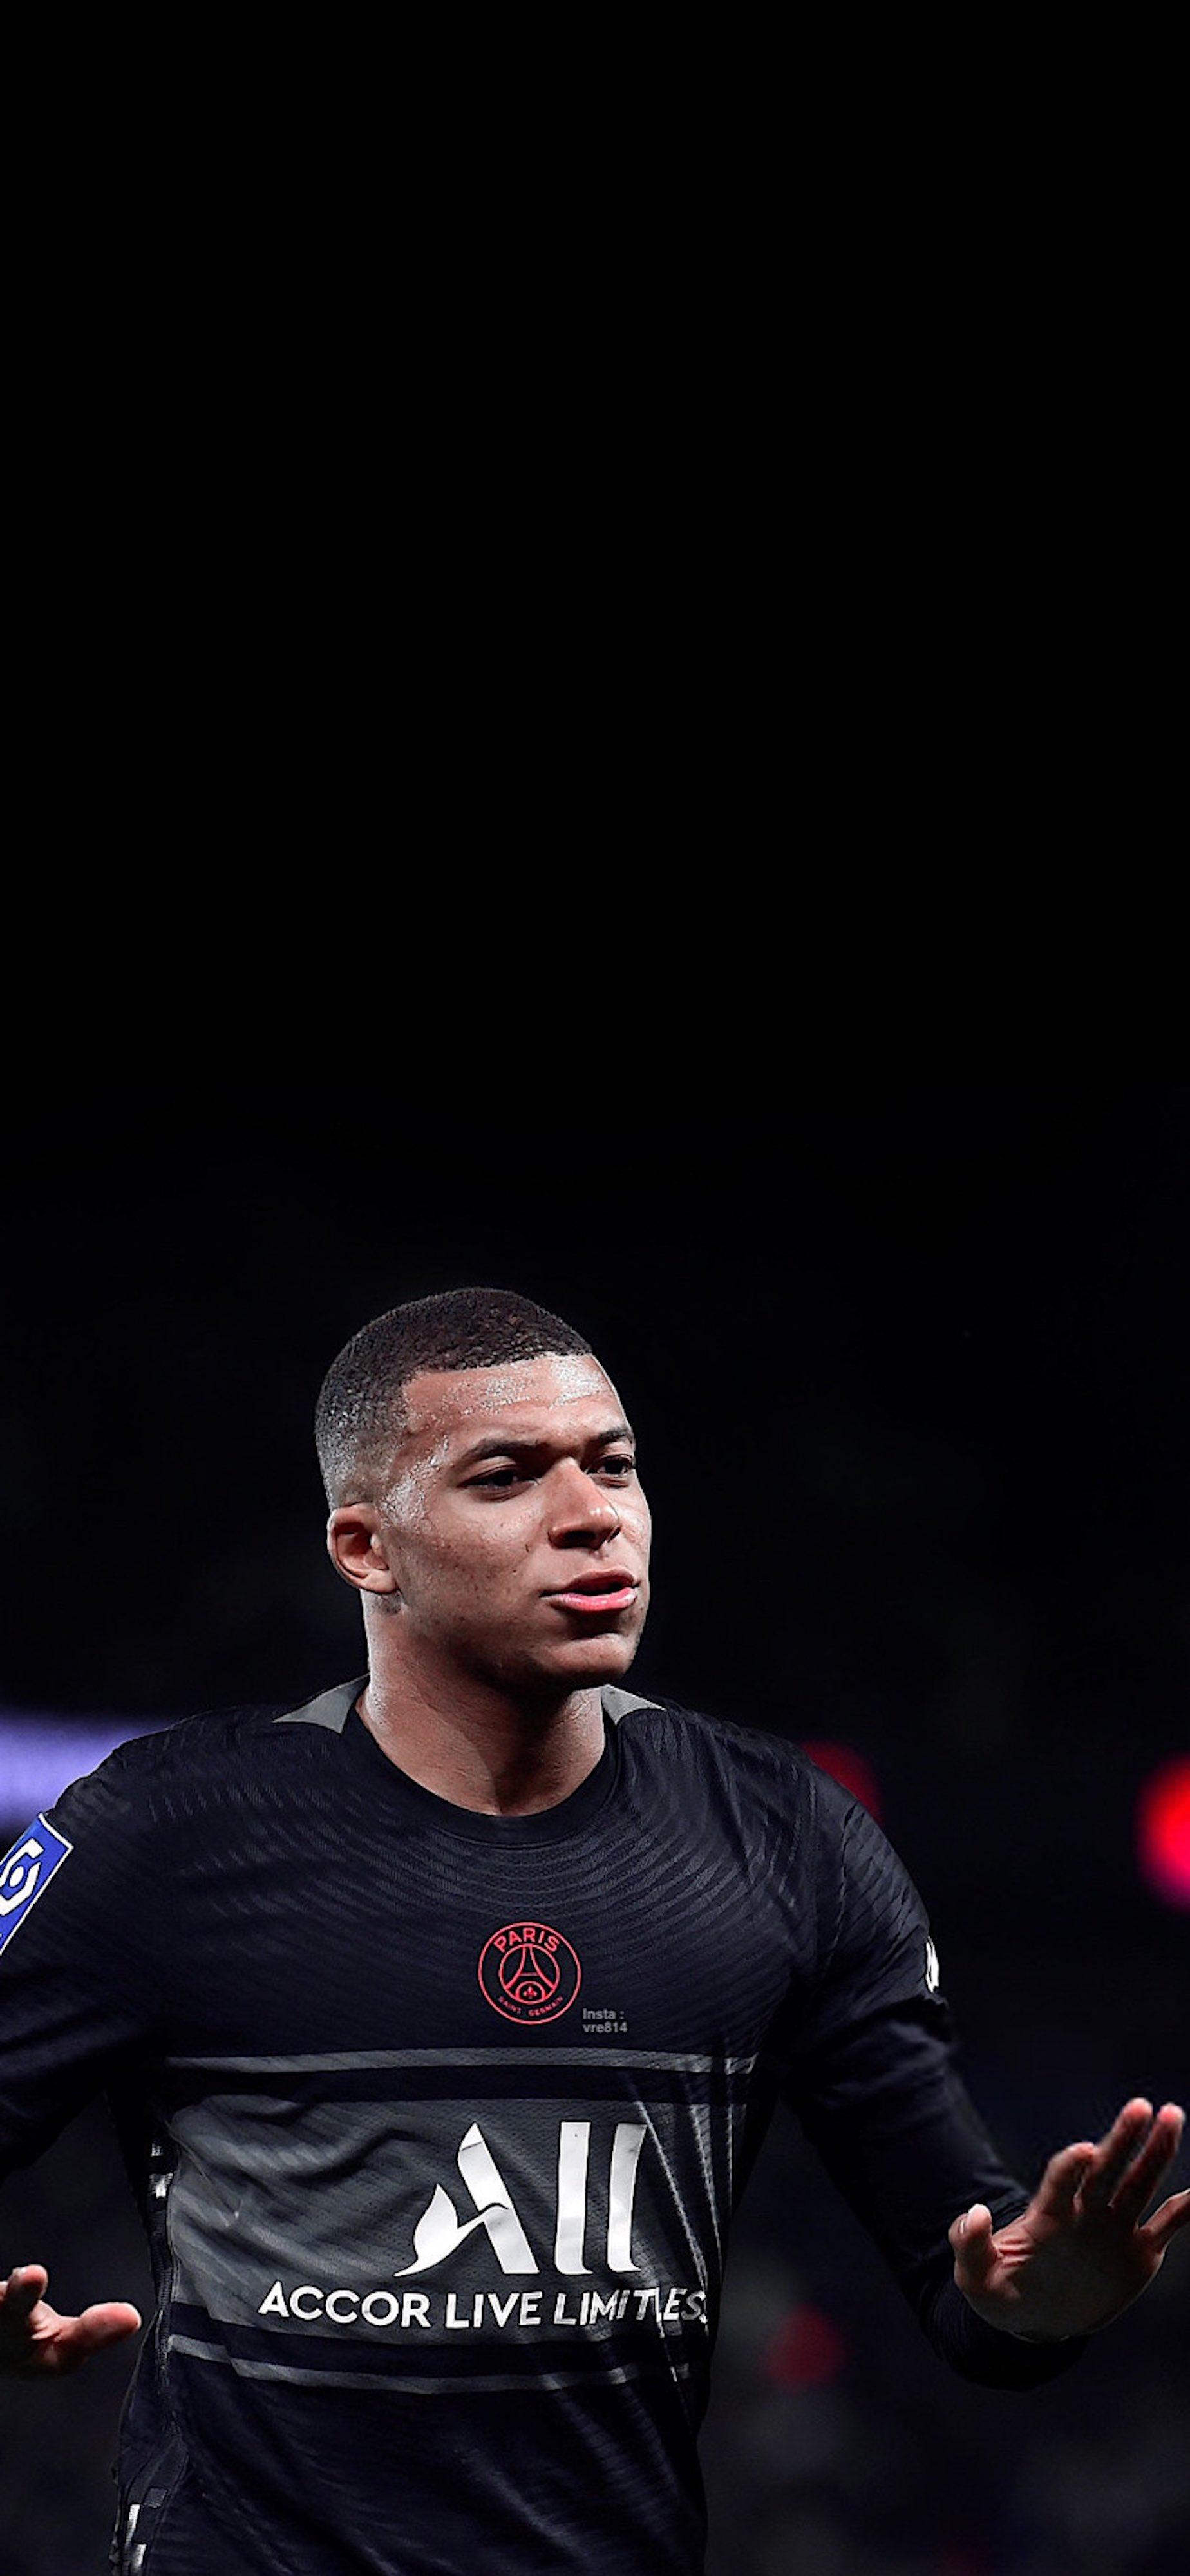 Mbappe 2022 Wallpapers